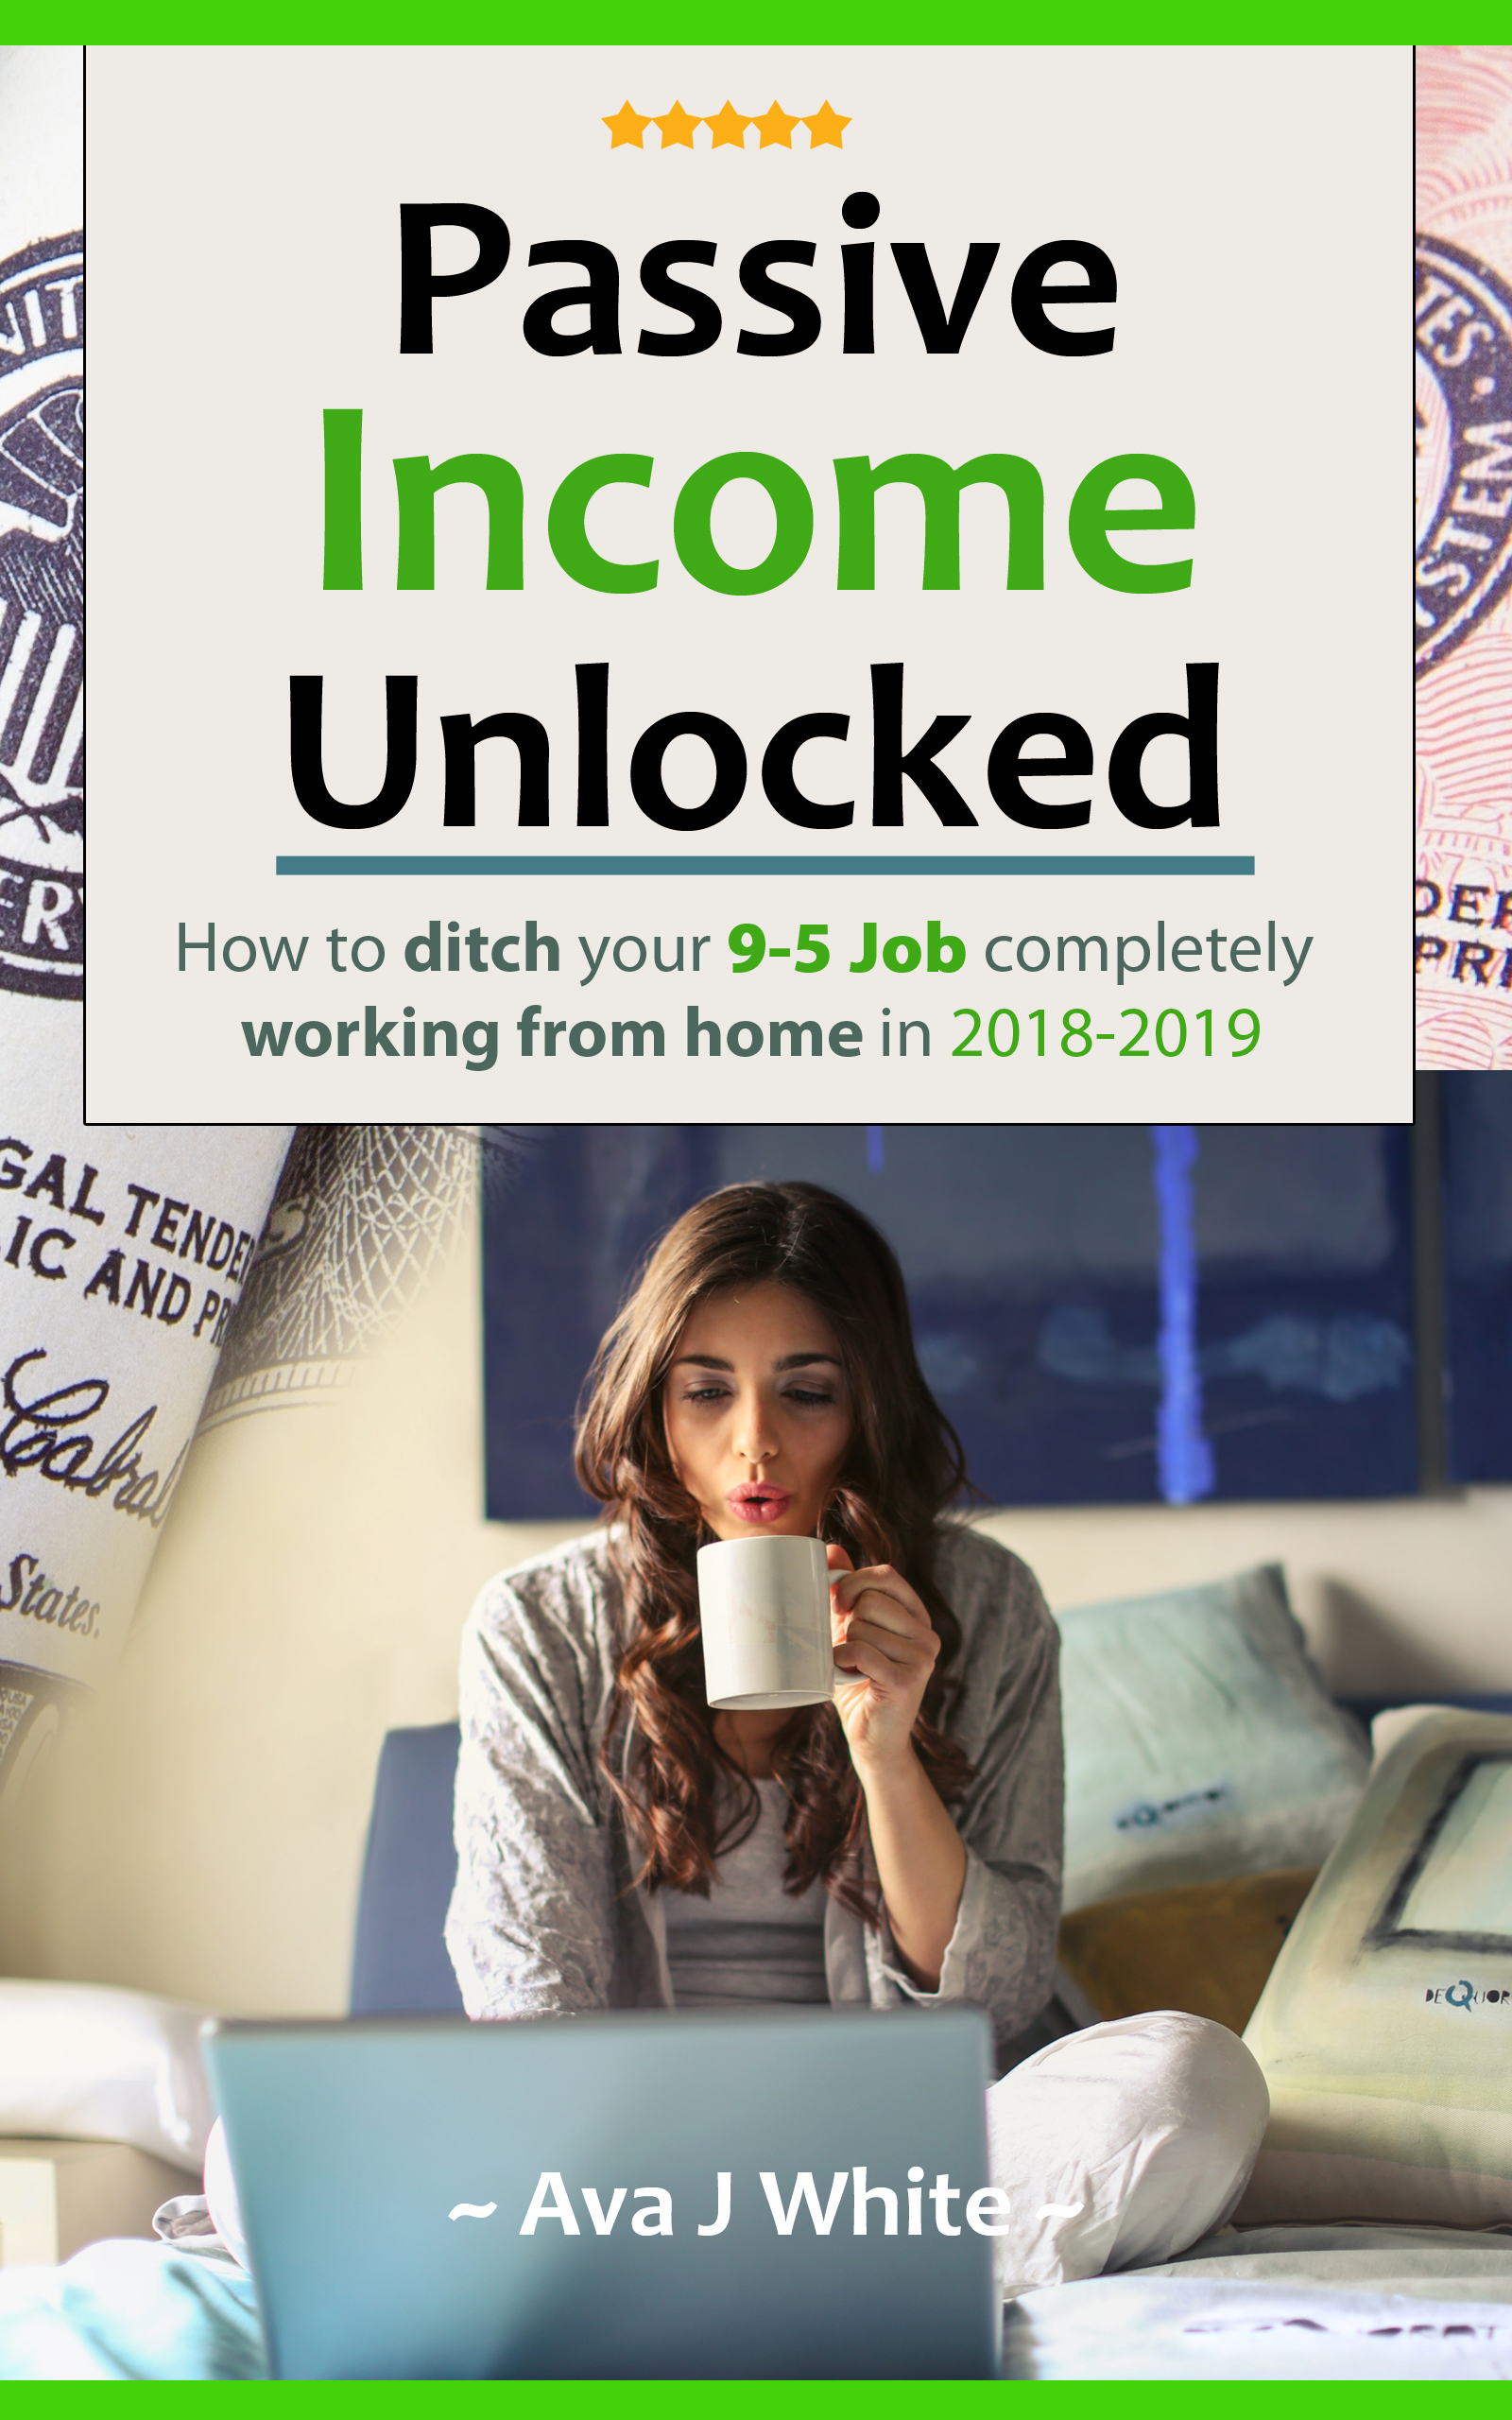 FREE: Passive Income Unlocked: How to Ditch Your 9-5 Job Completely in 2018-19 by Ava J White